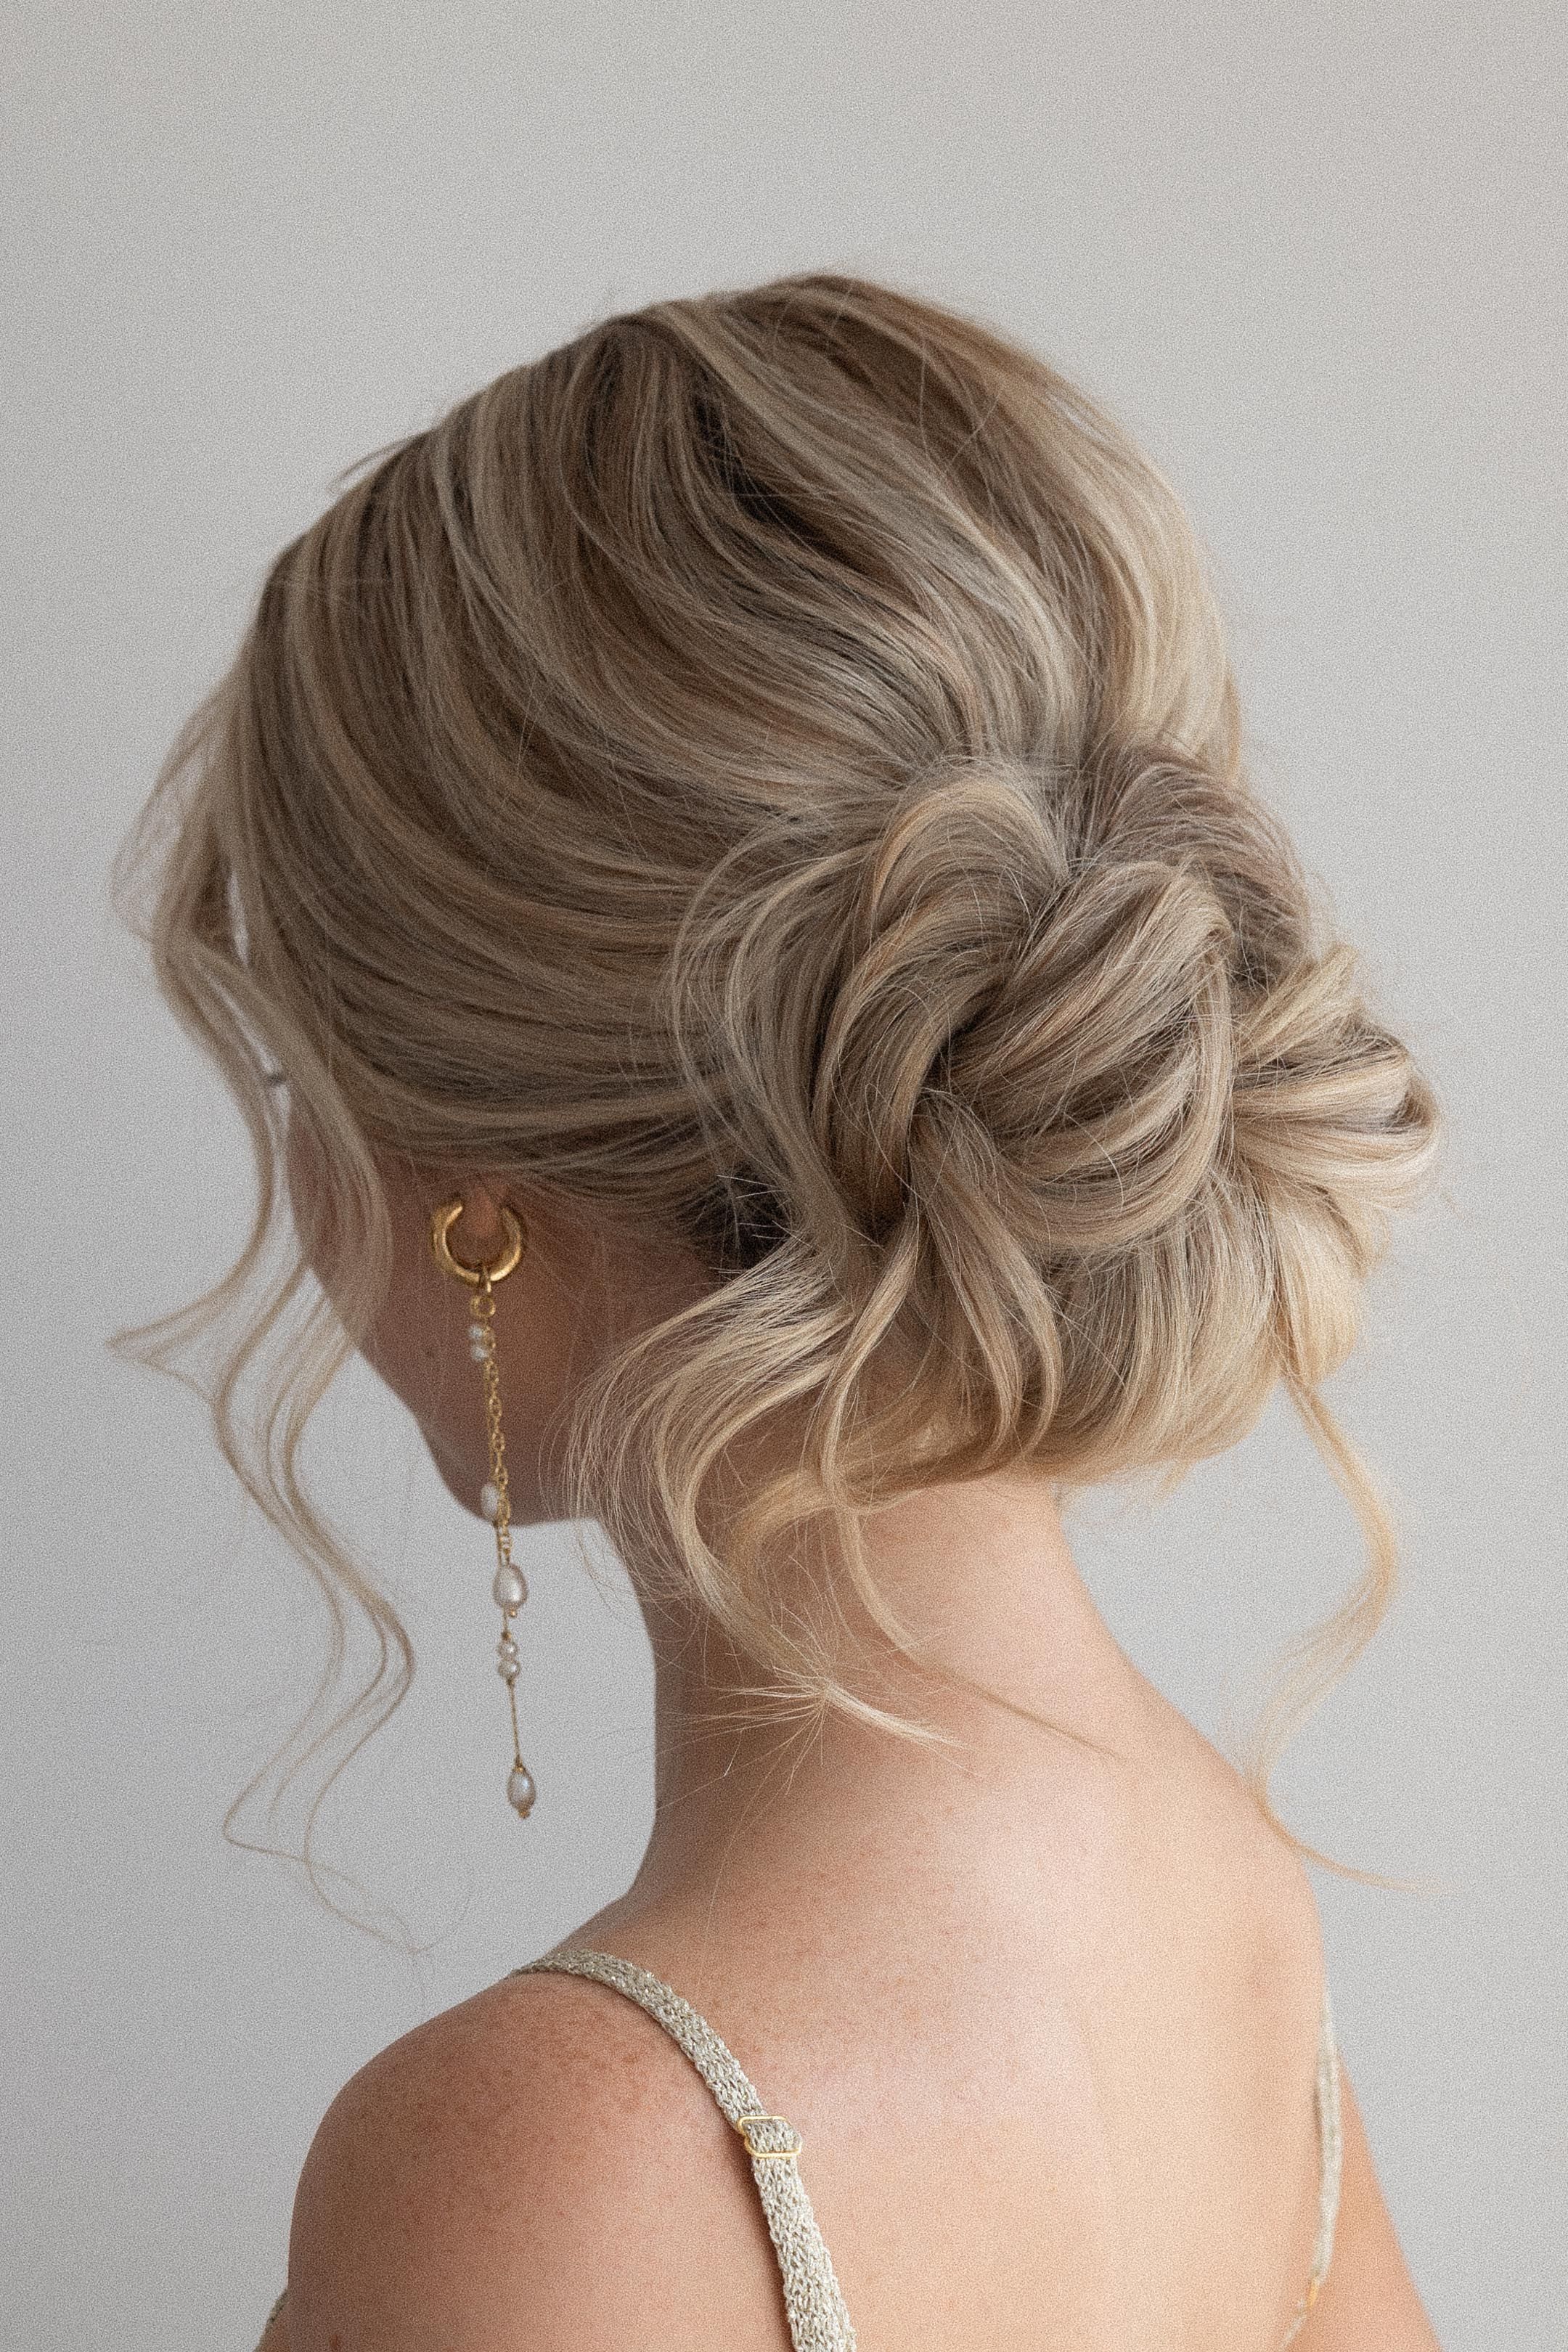 Easy Updo Wedding Hairstyle For Long Hair – Alex Gaboury With Regard To Bridesmaid’s Updo For Long Hair (Photo 16 of 25)